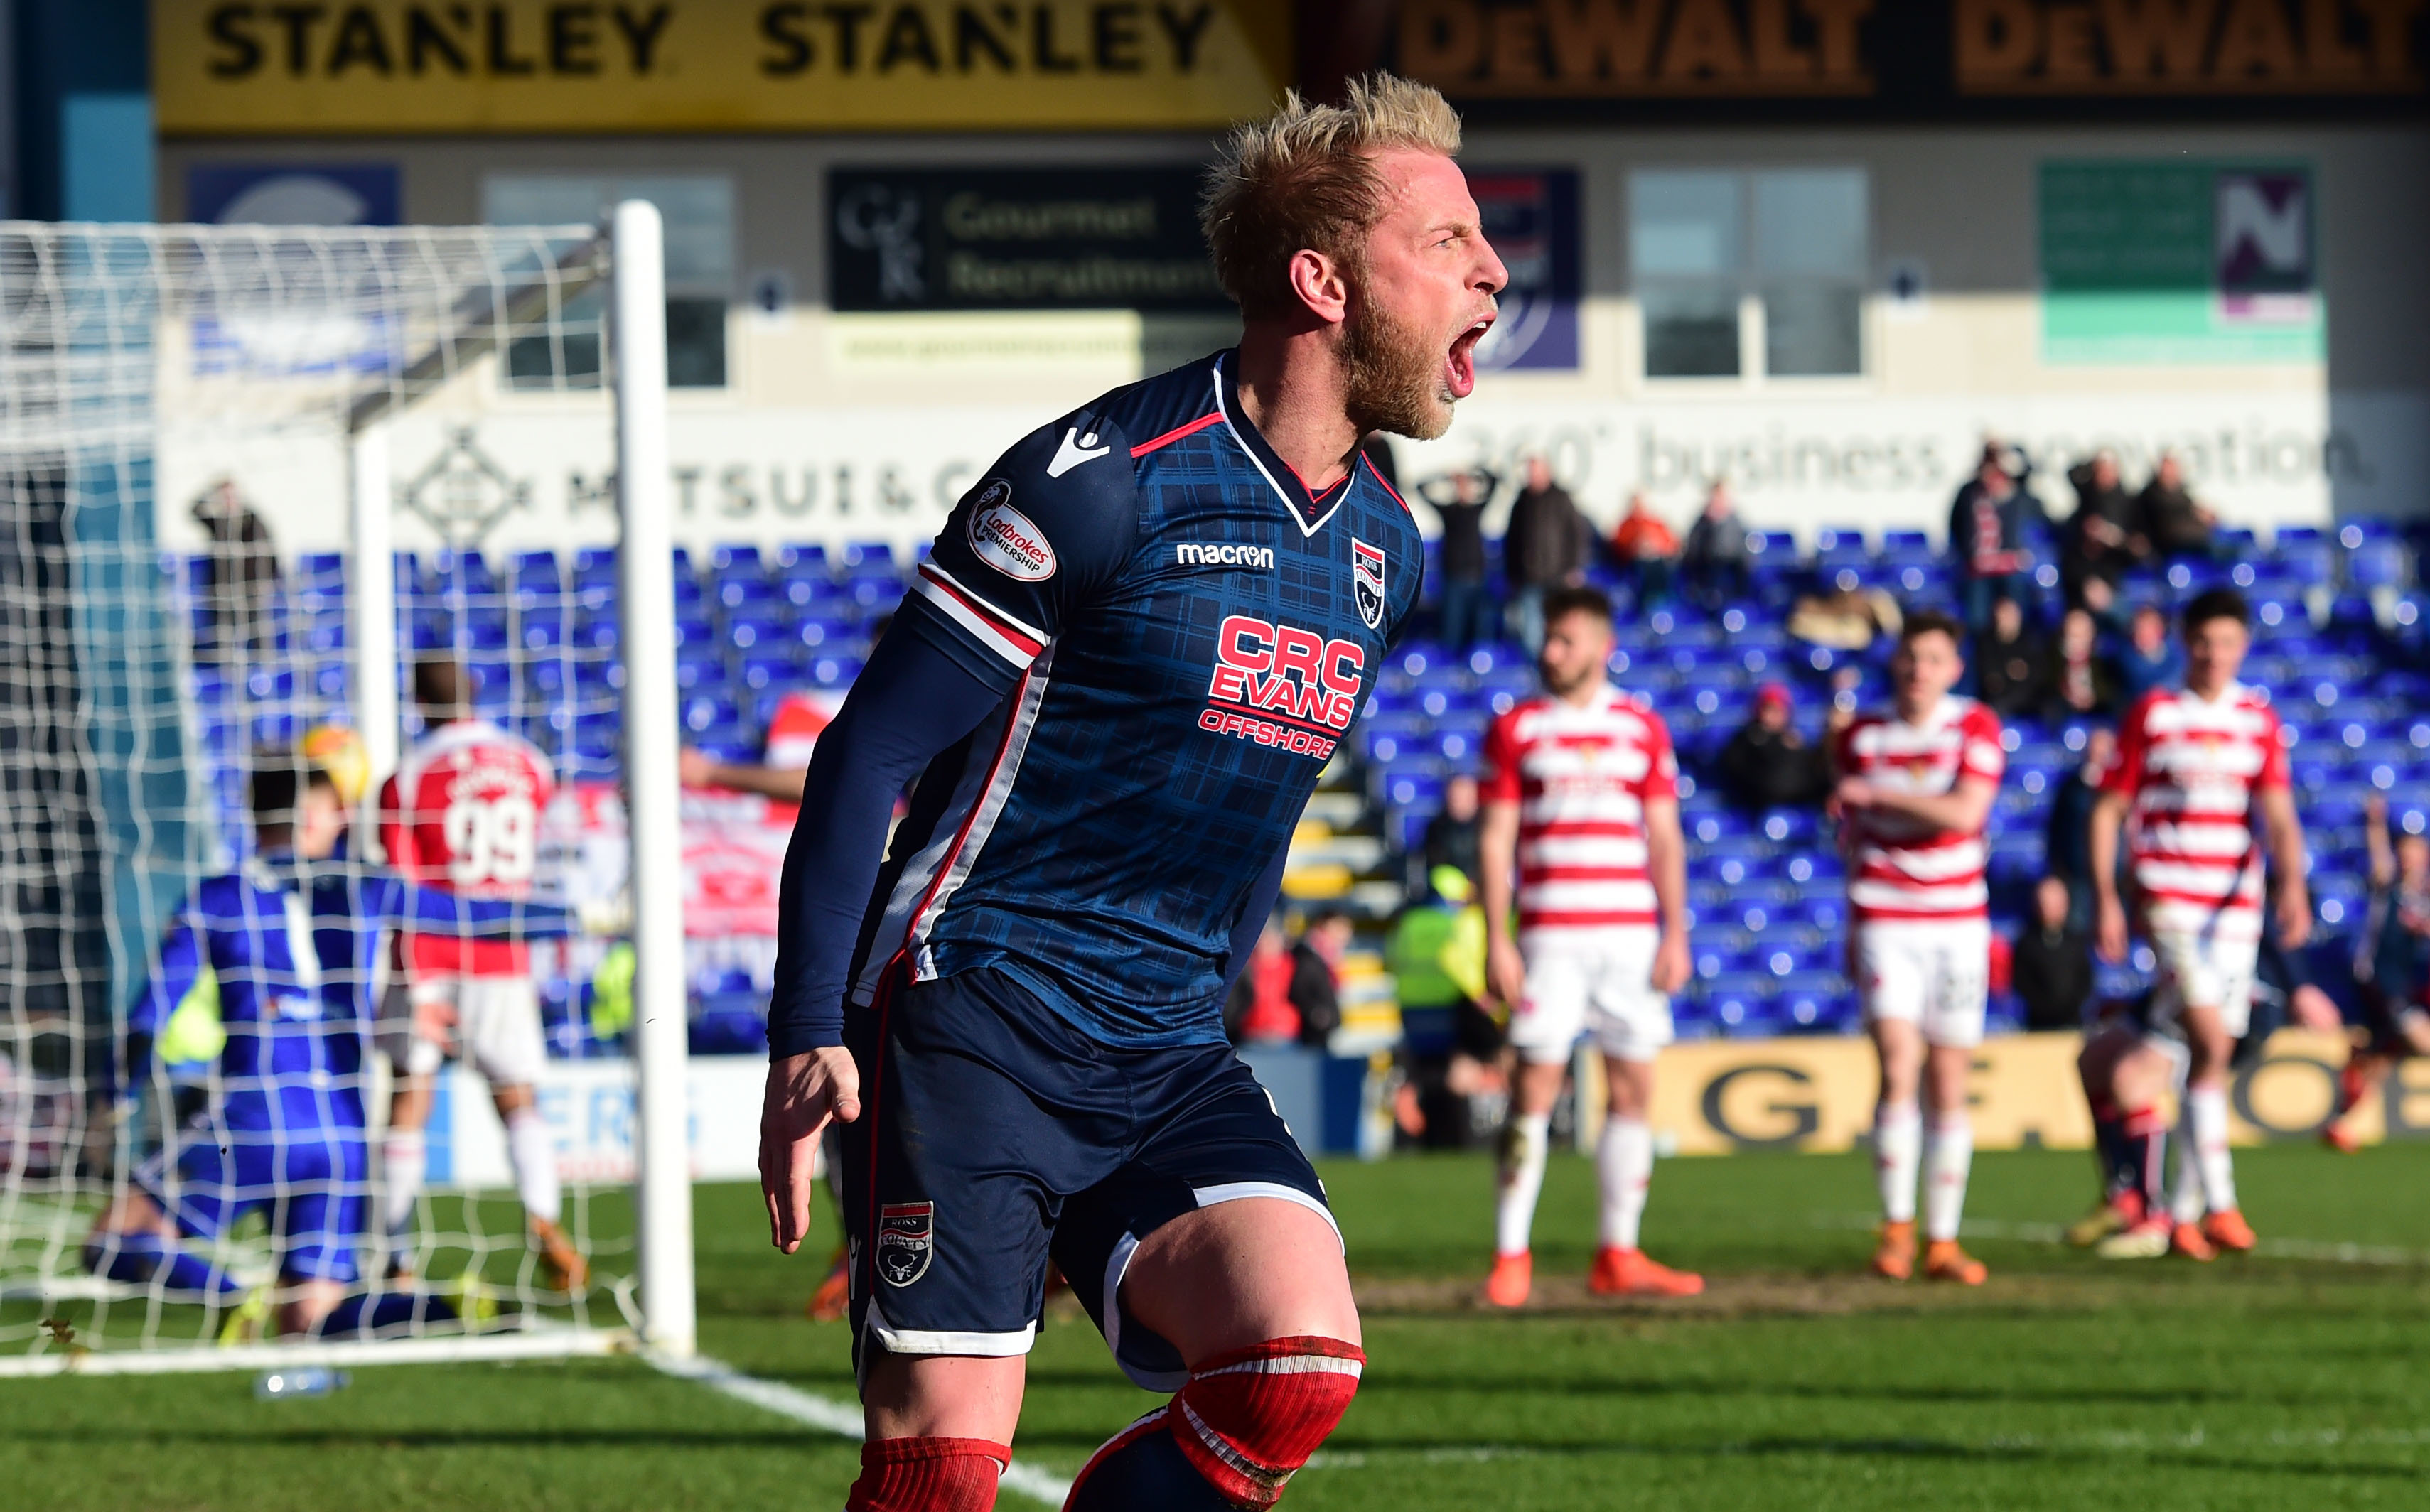 Ross County's Andrew Davies celebrates scoring his side's second goal